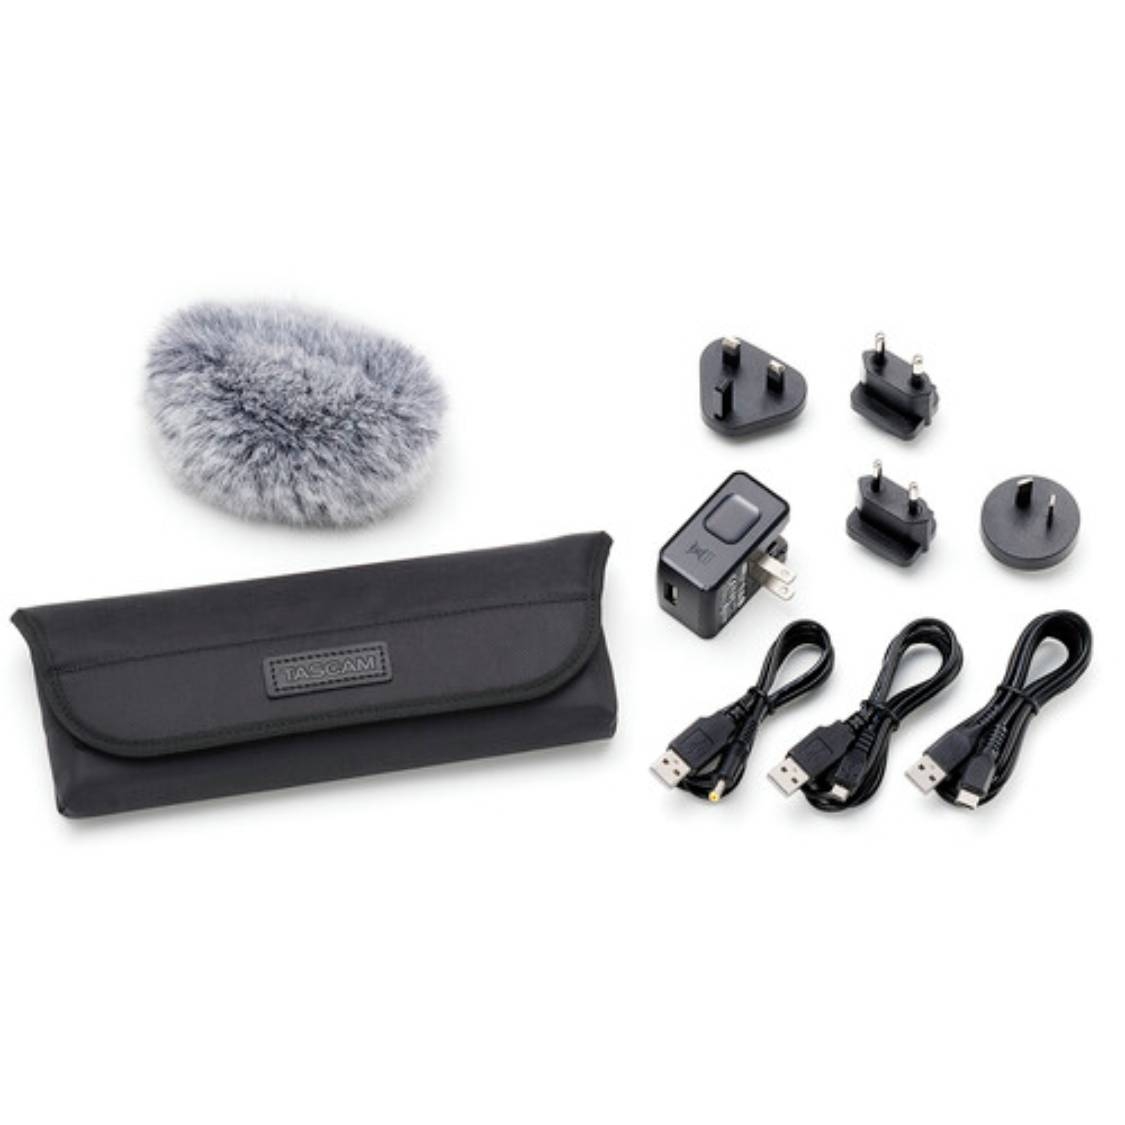 MKIII　Series　Field　DR　McBain　Camera　Accessory　Pack　for　Recorders　Tascam　AK-DR11G